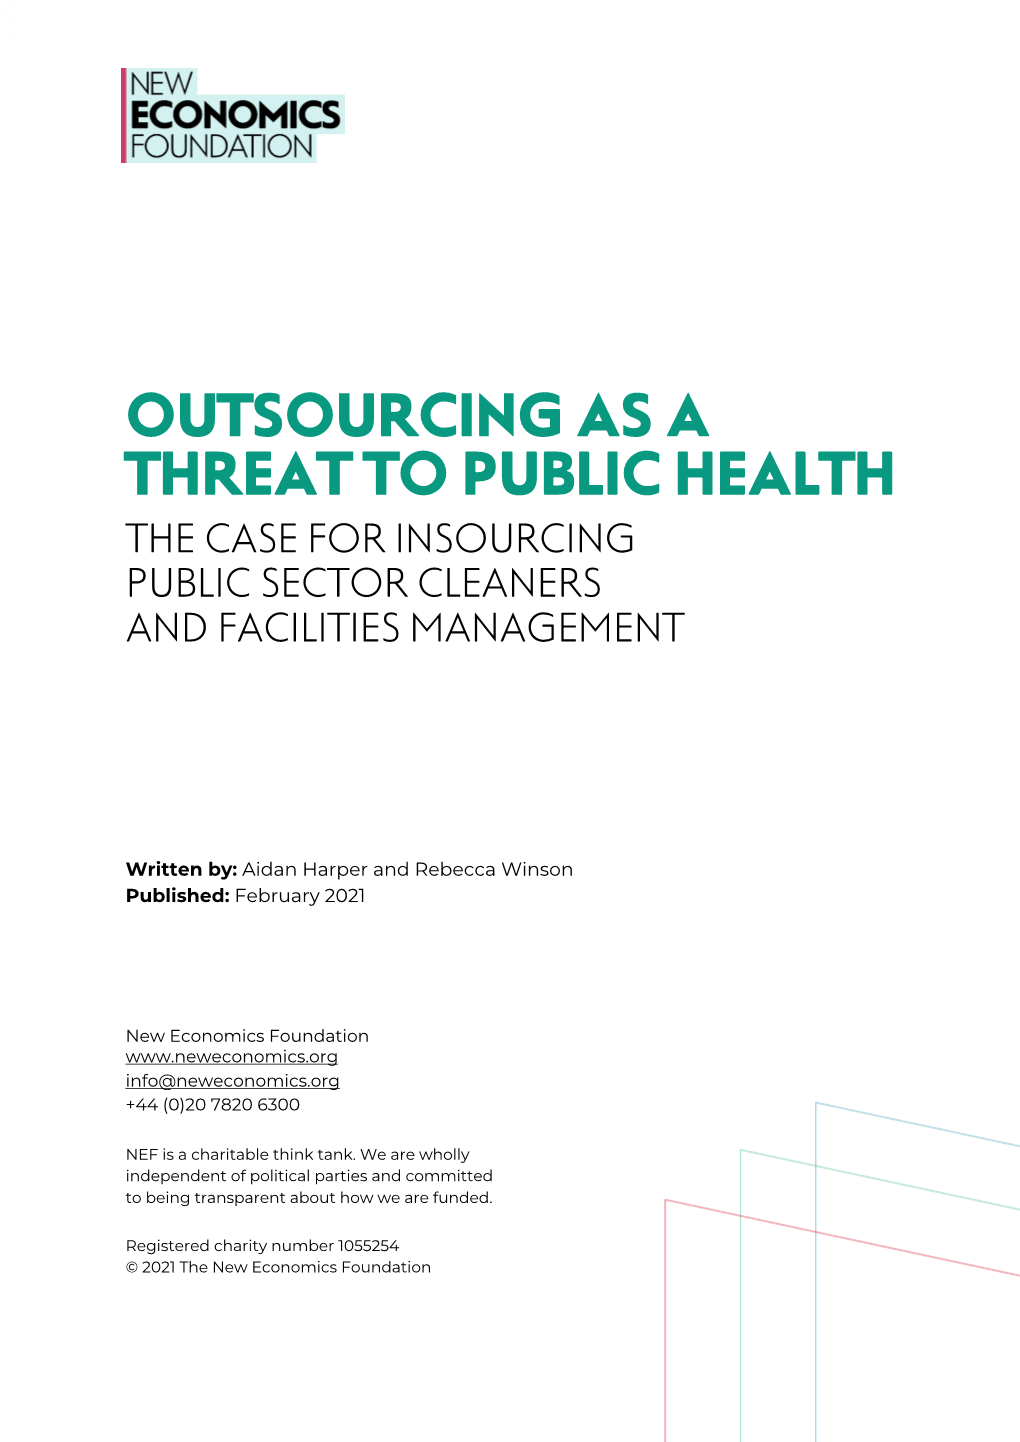 Outsourcing As a Threat to Public Health the Case for Insourcing Public Sector Cleaners and Facilities Management